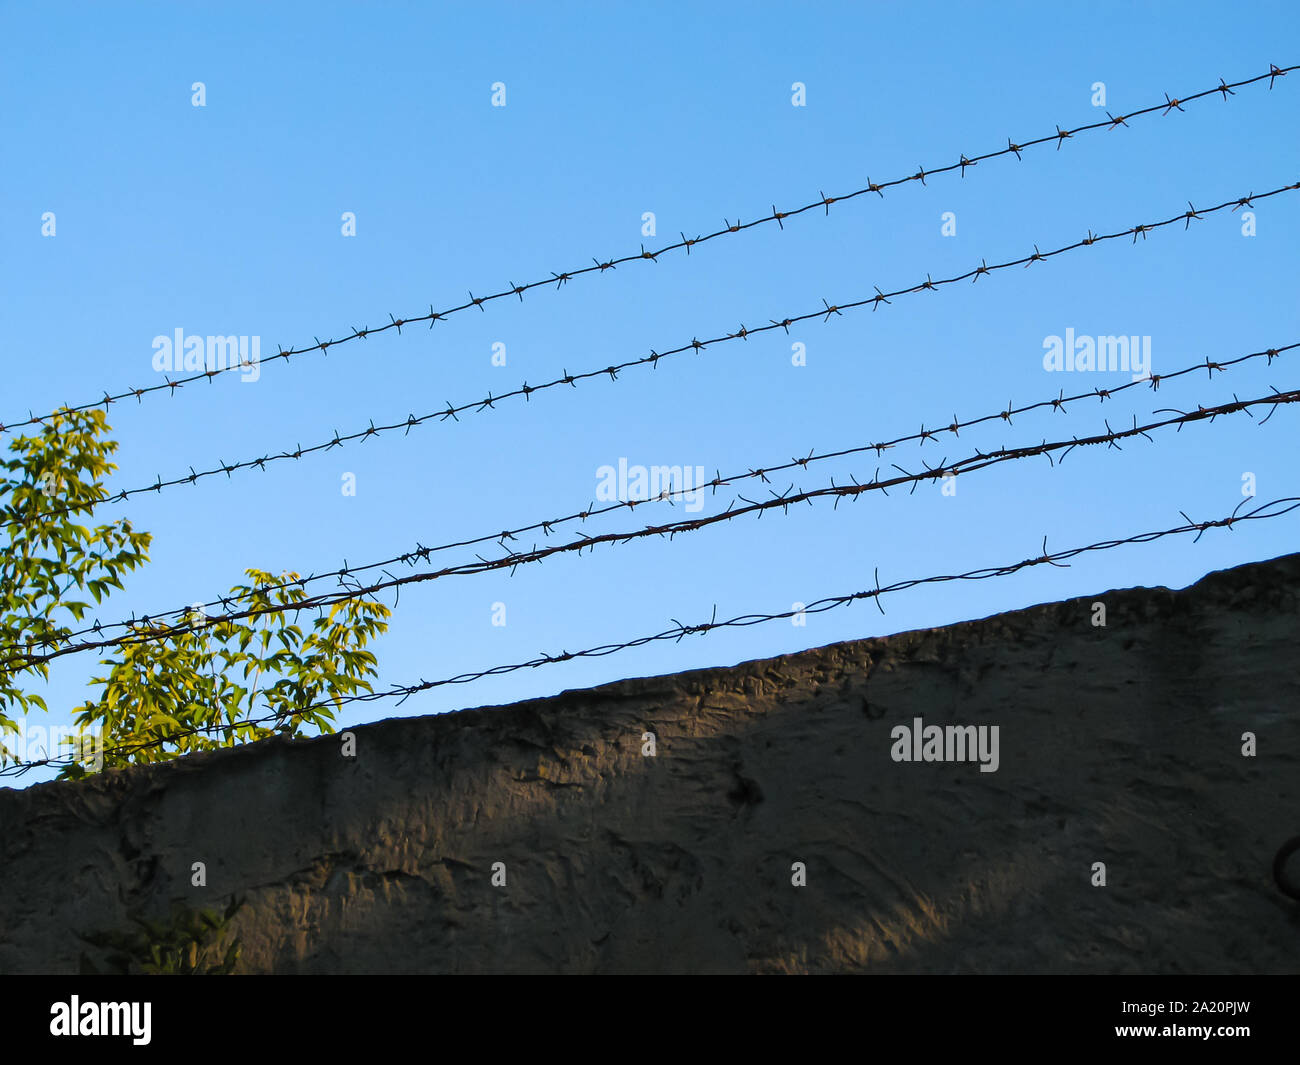 Several lines of handicraft old rusty barbed wire stretched over an old concrete fence against a clear blue sky and green shrub Stock Photo